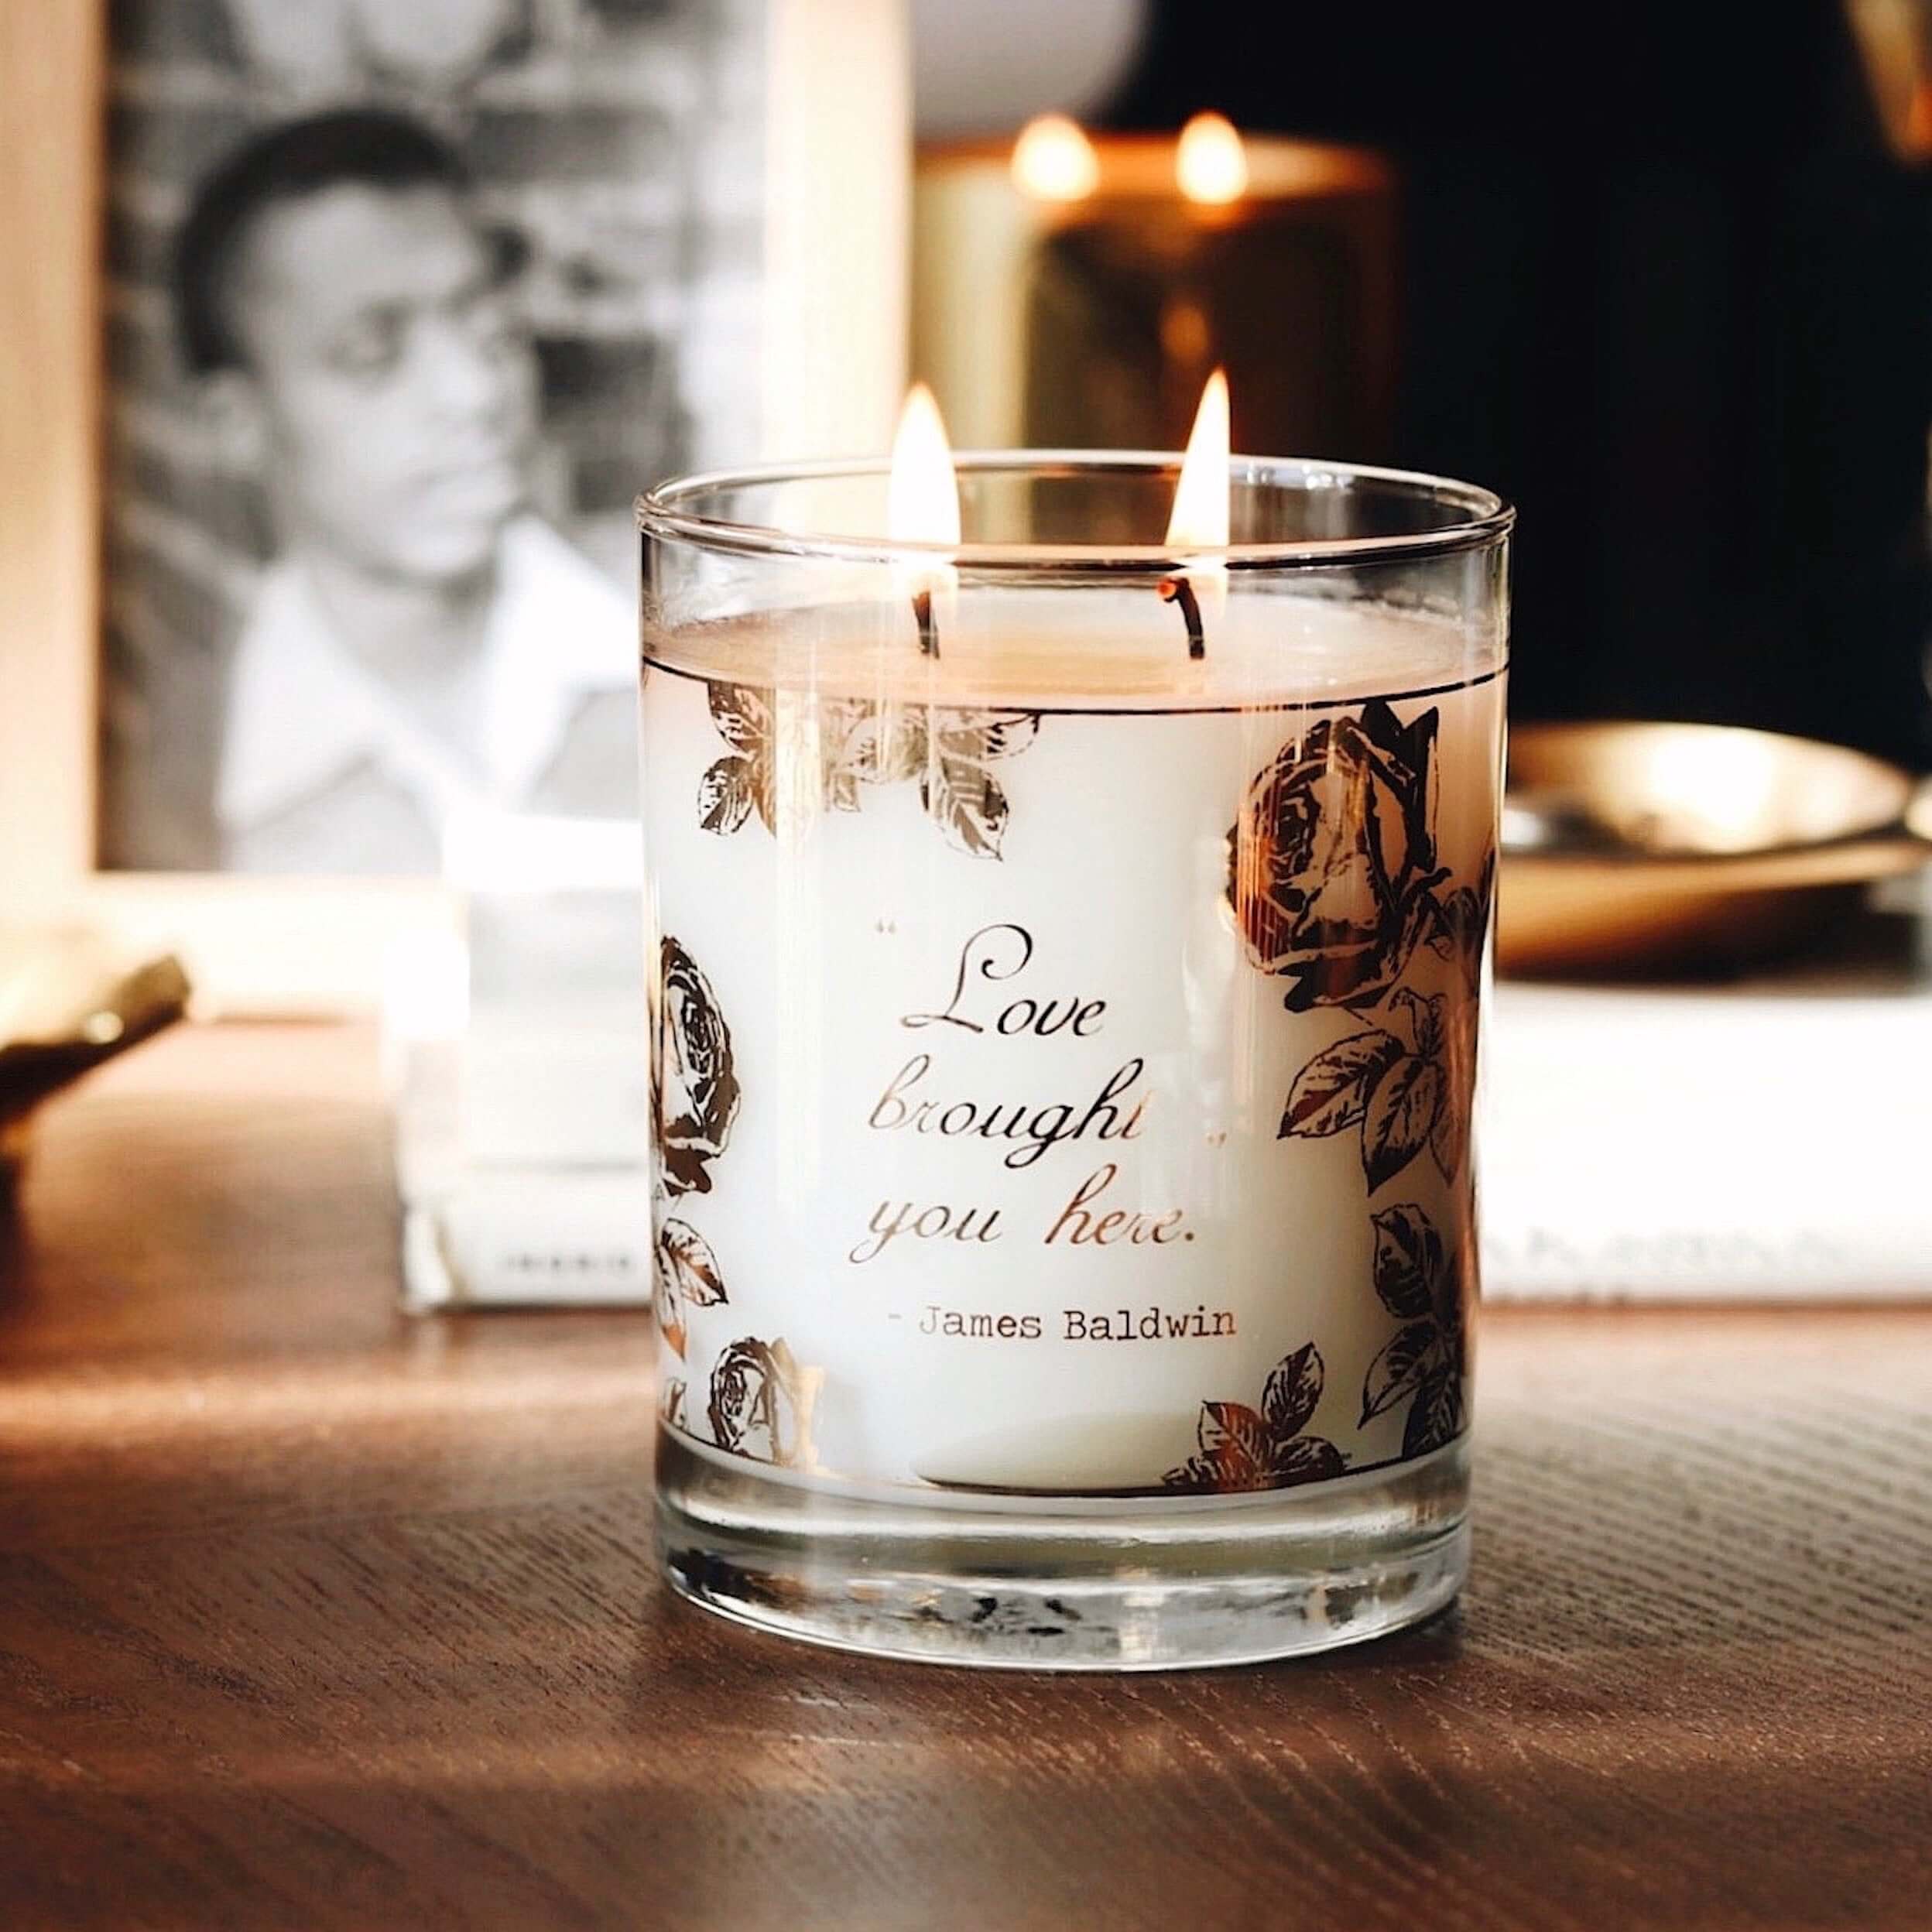 Limited ed22K Gold Cocktail Glass Love candle.  It says "Love Brought You Here" - James Baldwin There is a faint image of James Baldwin the background of this lifestyle image.